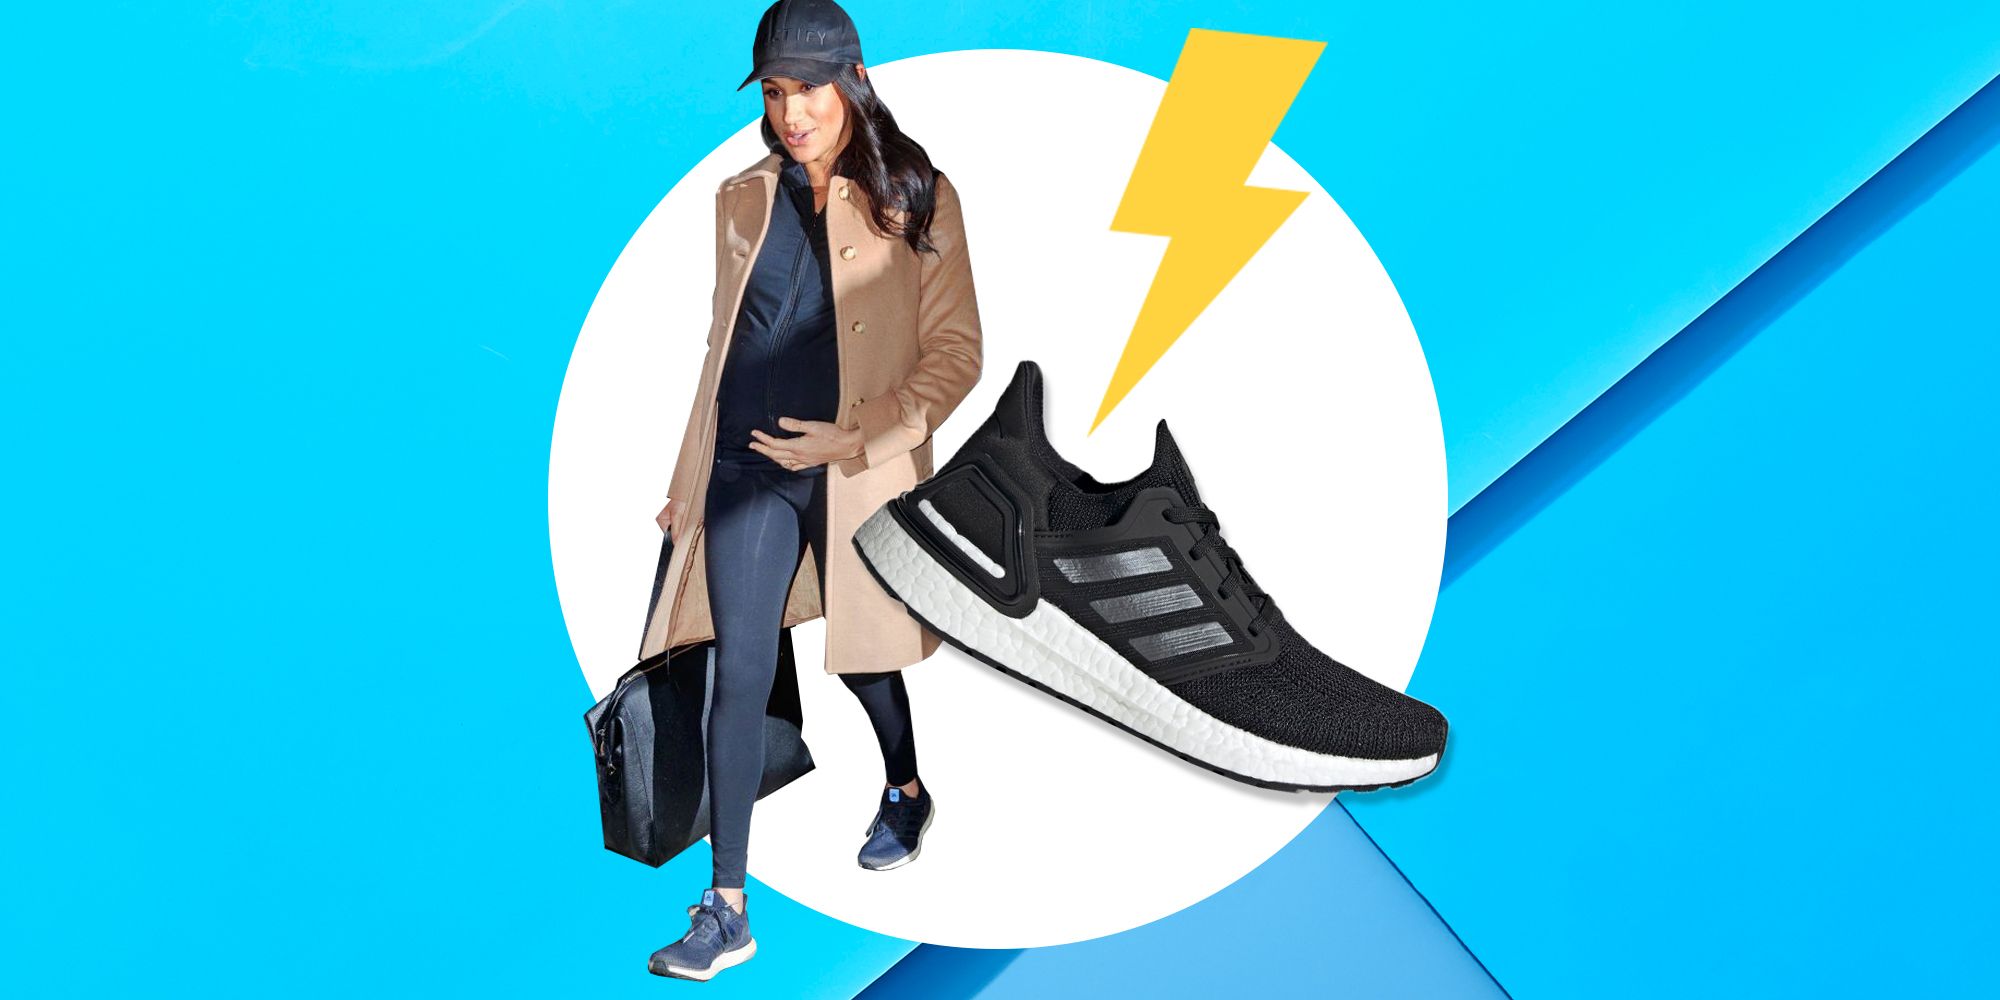 adidas shoes 40 off